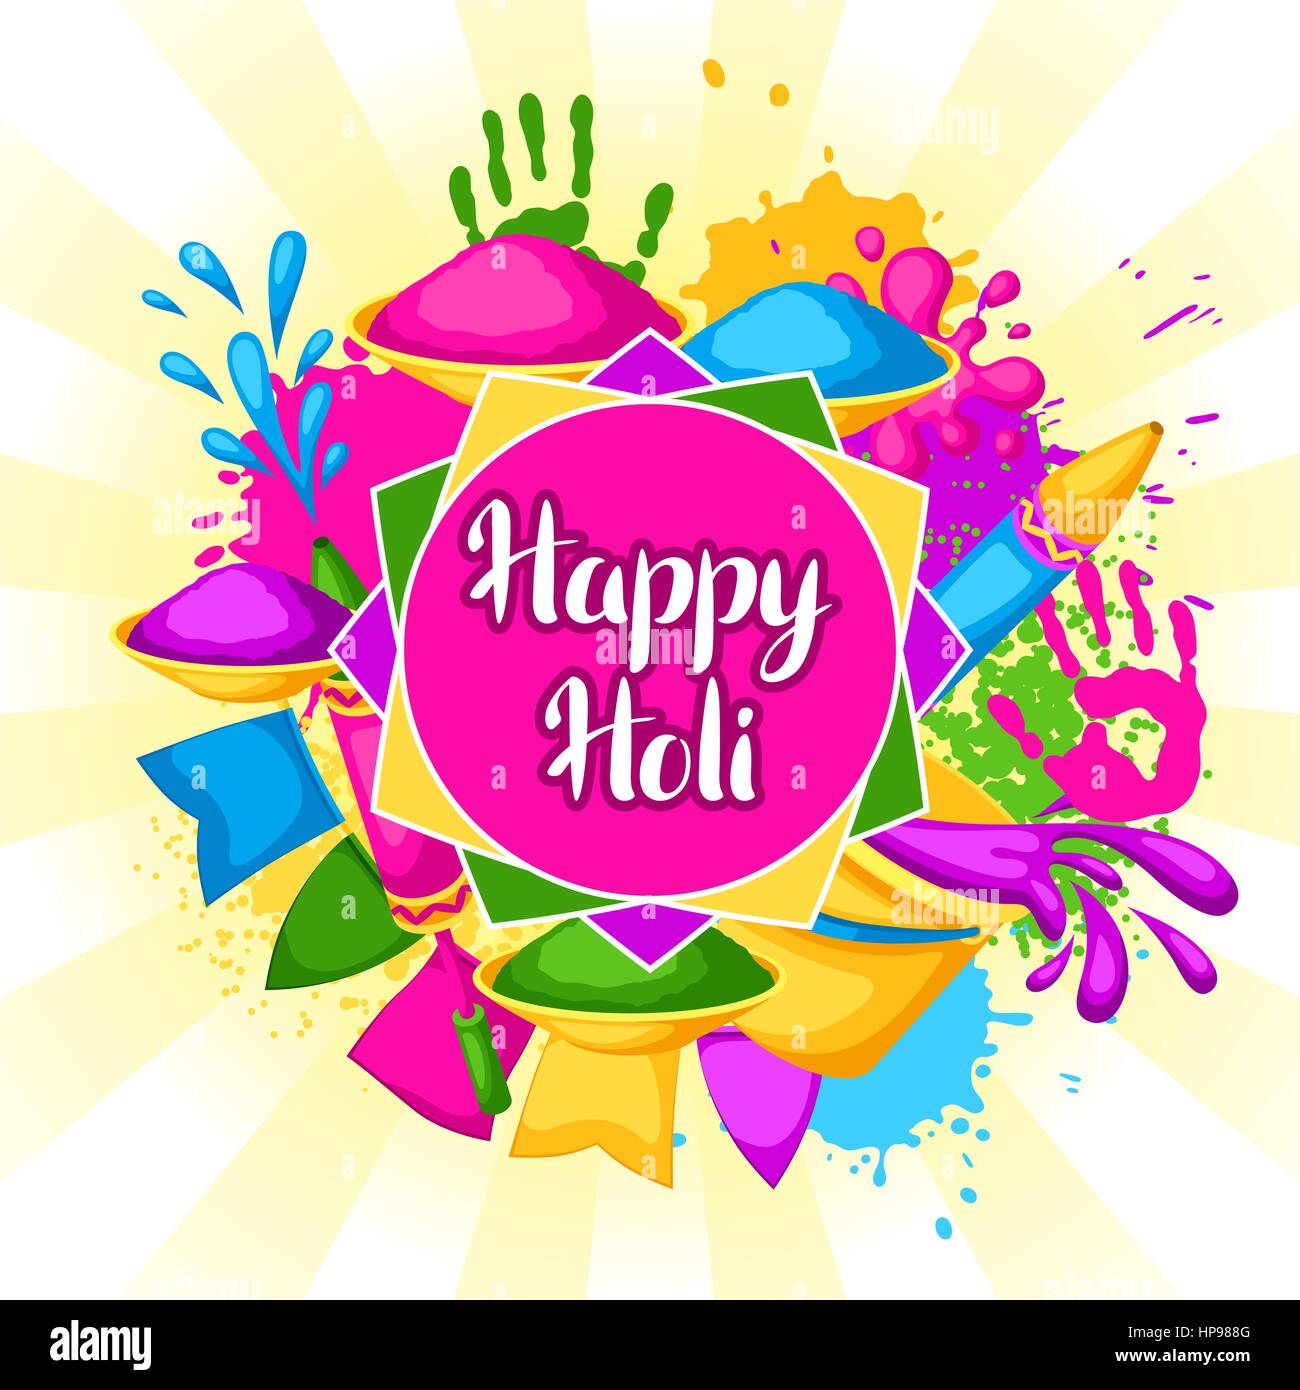 Happy Holi colorful background. Illustration of buckets with paint, water guns, flags, blots and stains. Stock Vector